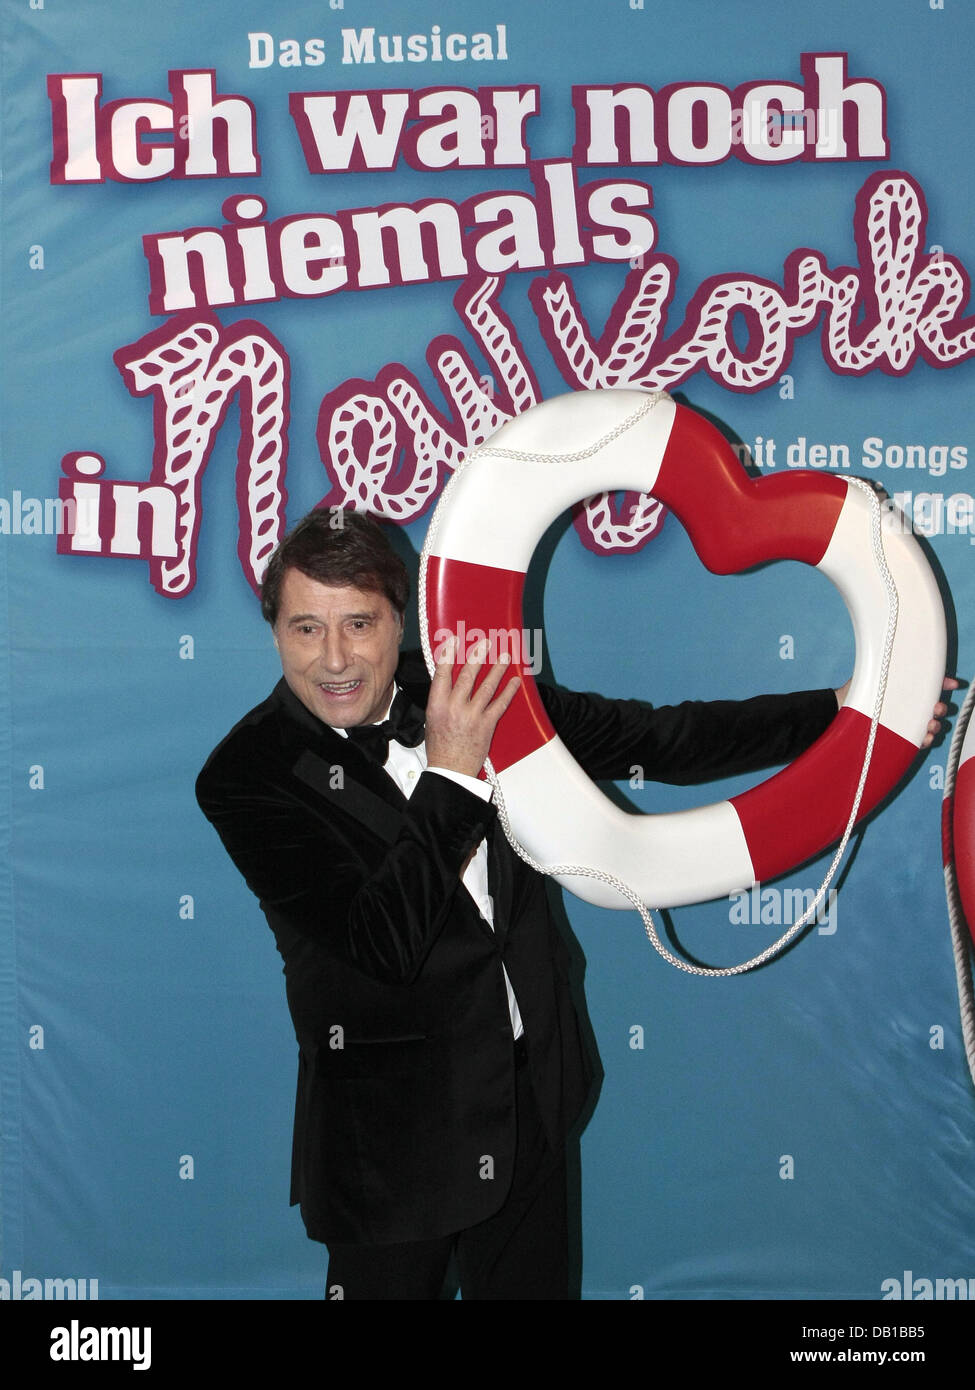 Udo Juergens poses for photographers at the premiere of the musical 'Ich war noch niemals in New York' (lit.: I have never been to New York) based on his songs at TUI Operetta House in Hamburg, Germany, 02 December 2007. 38 actors perform several of Juergens' songs during the musical. Photo: ULRICH PERREY Stock Photo